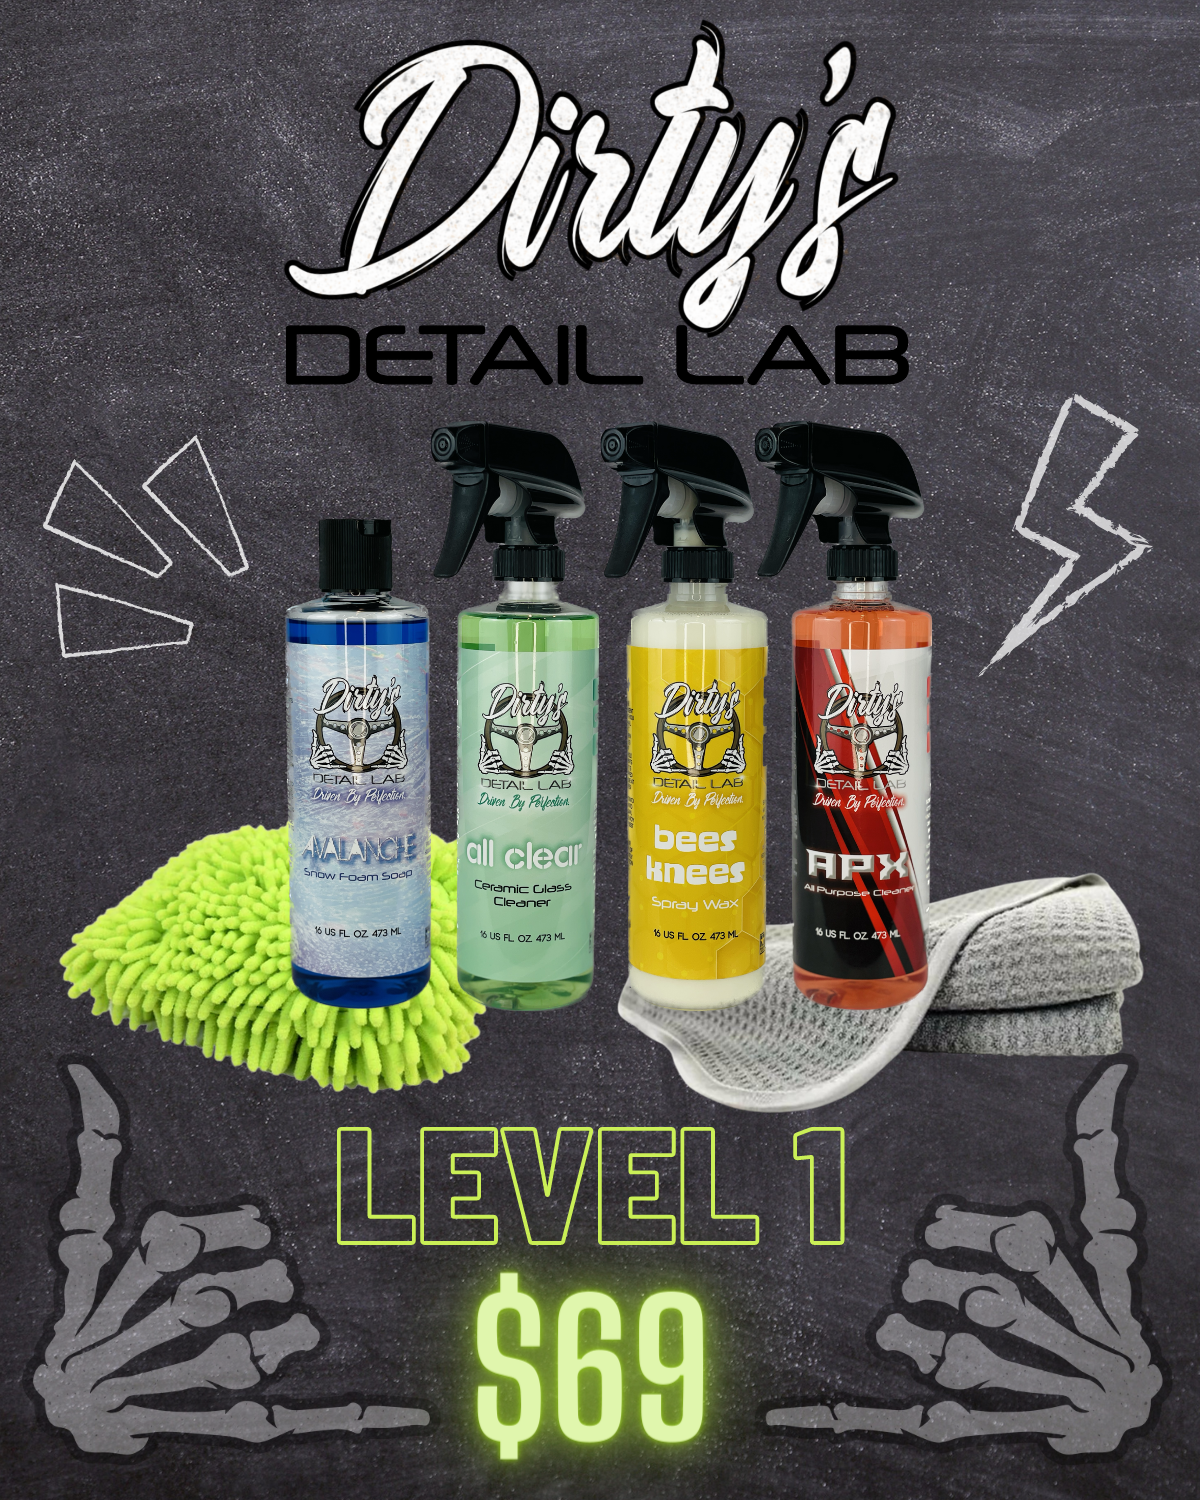 Dirty's Detail Lab